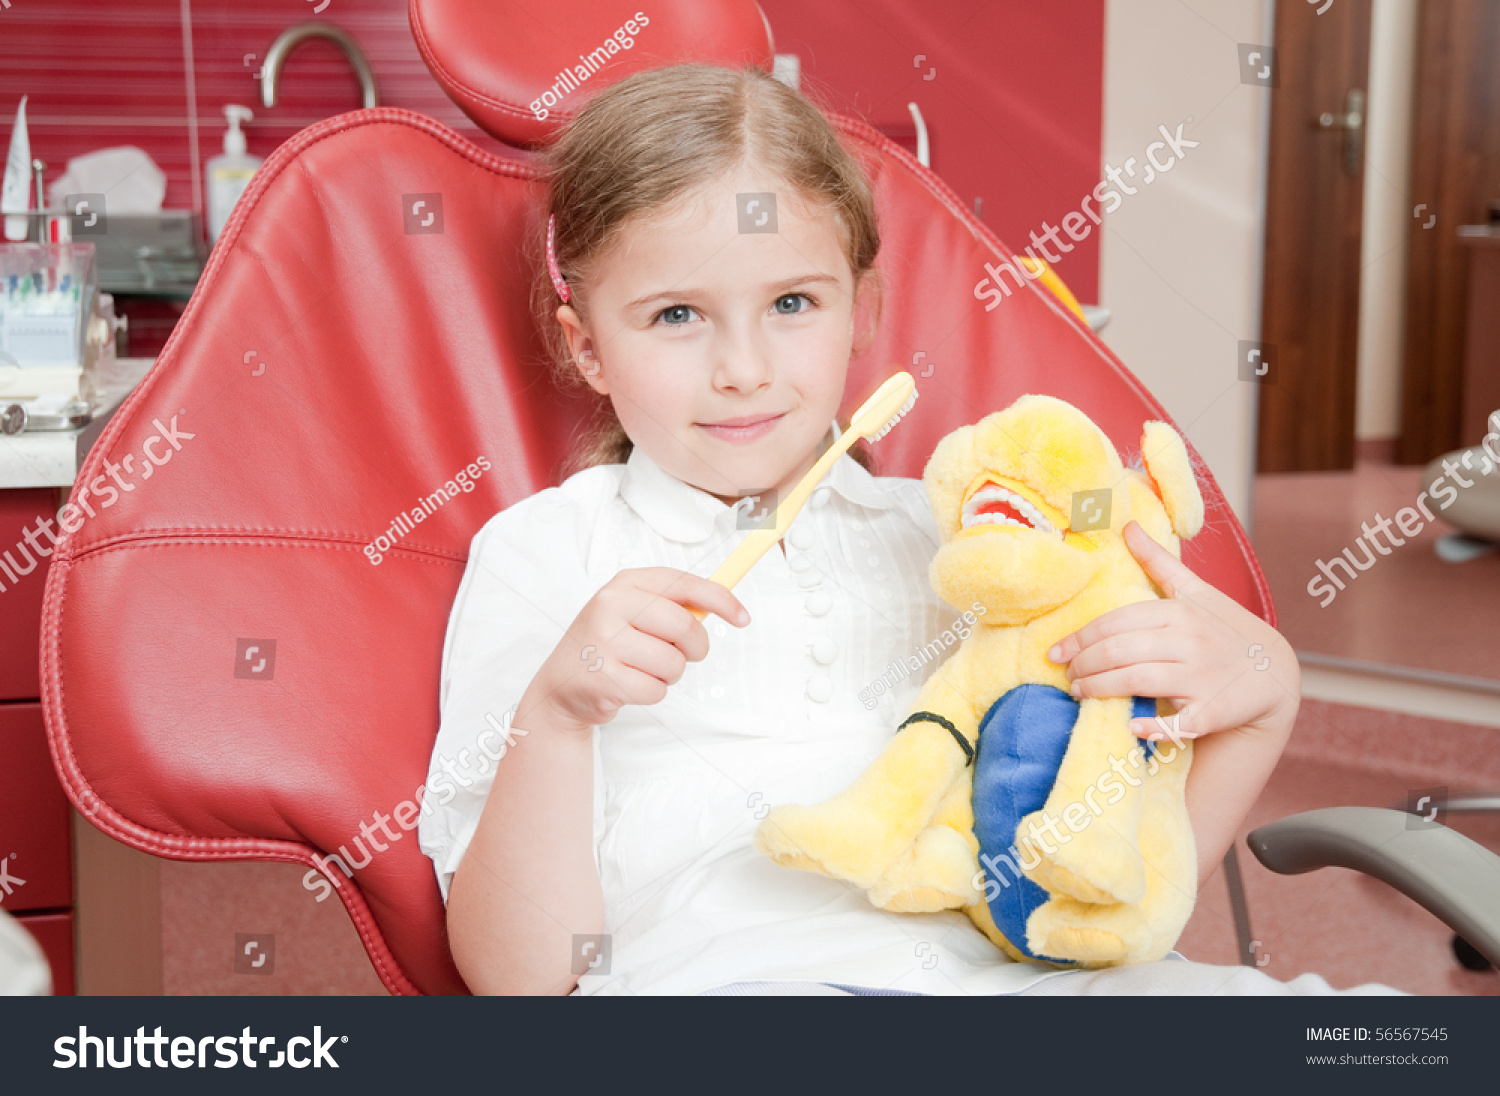 Little Patient Dental Clinic Noname Toy Stock Photo 56567545 | Shutterstock